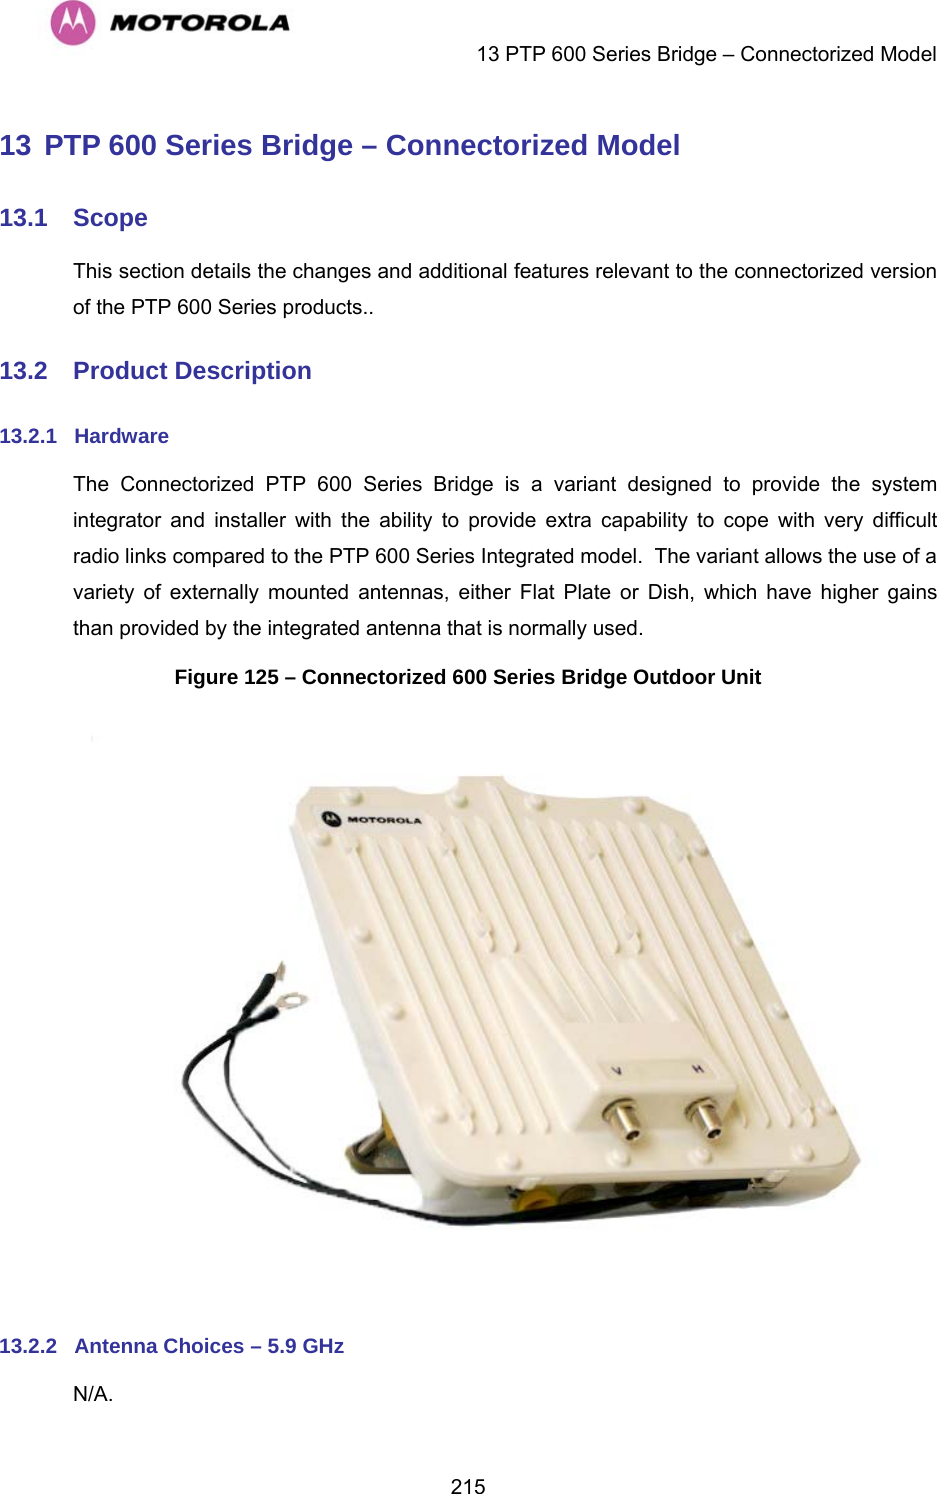    13 PTP 600 Series Bridge – Connectorized Model  21513 PTP 600 Series Bridge – Connectorized Model 13.1  Scope This section details the changes and additional features relevant to the connectorized version of the PTP 600 Series products.. 13.2  Product Description 13.2.1  Hardware The Connectorized PTP 600 Series Bridge is a variant designed to provide the system integrator and installer with the ability to provide extra capability to cope with very difficult radio links compared to the PTP 600 Series Integrated model.  The variant allows the use of a variety of externally mounted antennas, either Flat Plate or Dish, which have higher gains than provided by the integrated antenna that is normally used. Figure 125 – Connectorized 600 Series Bridge Outdoor Unit   13.2.2  Antenna Choices – 5.9 GHz N/A. 